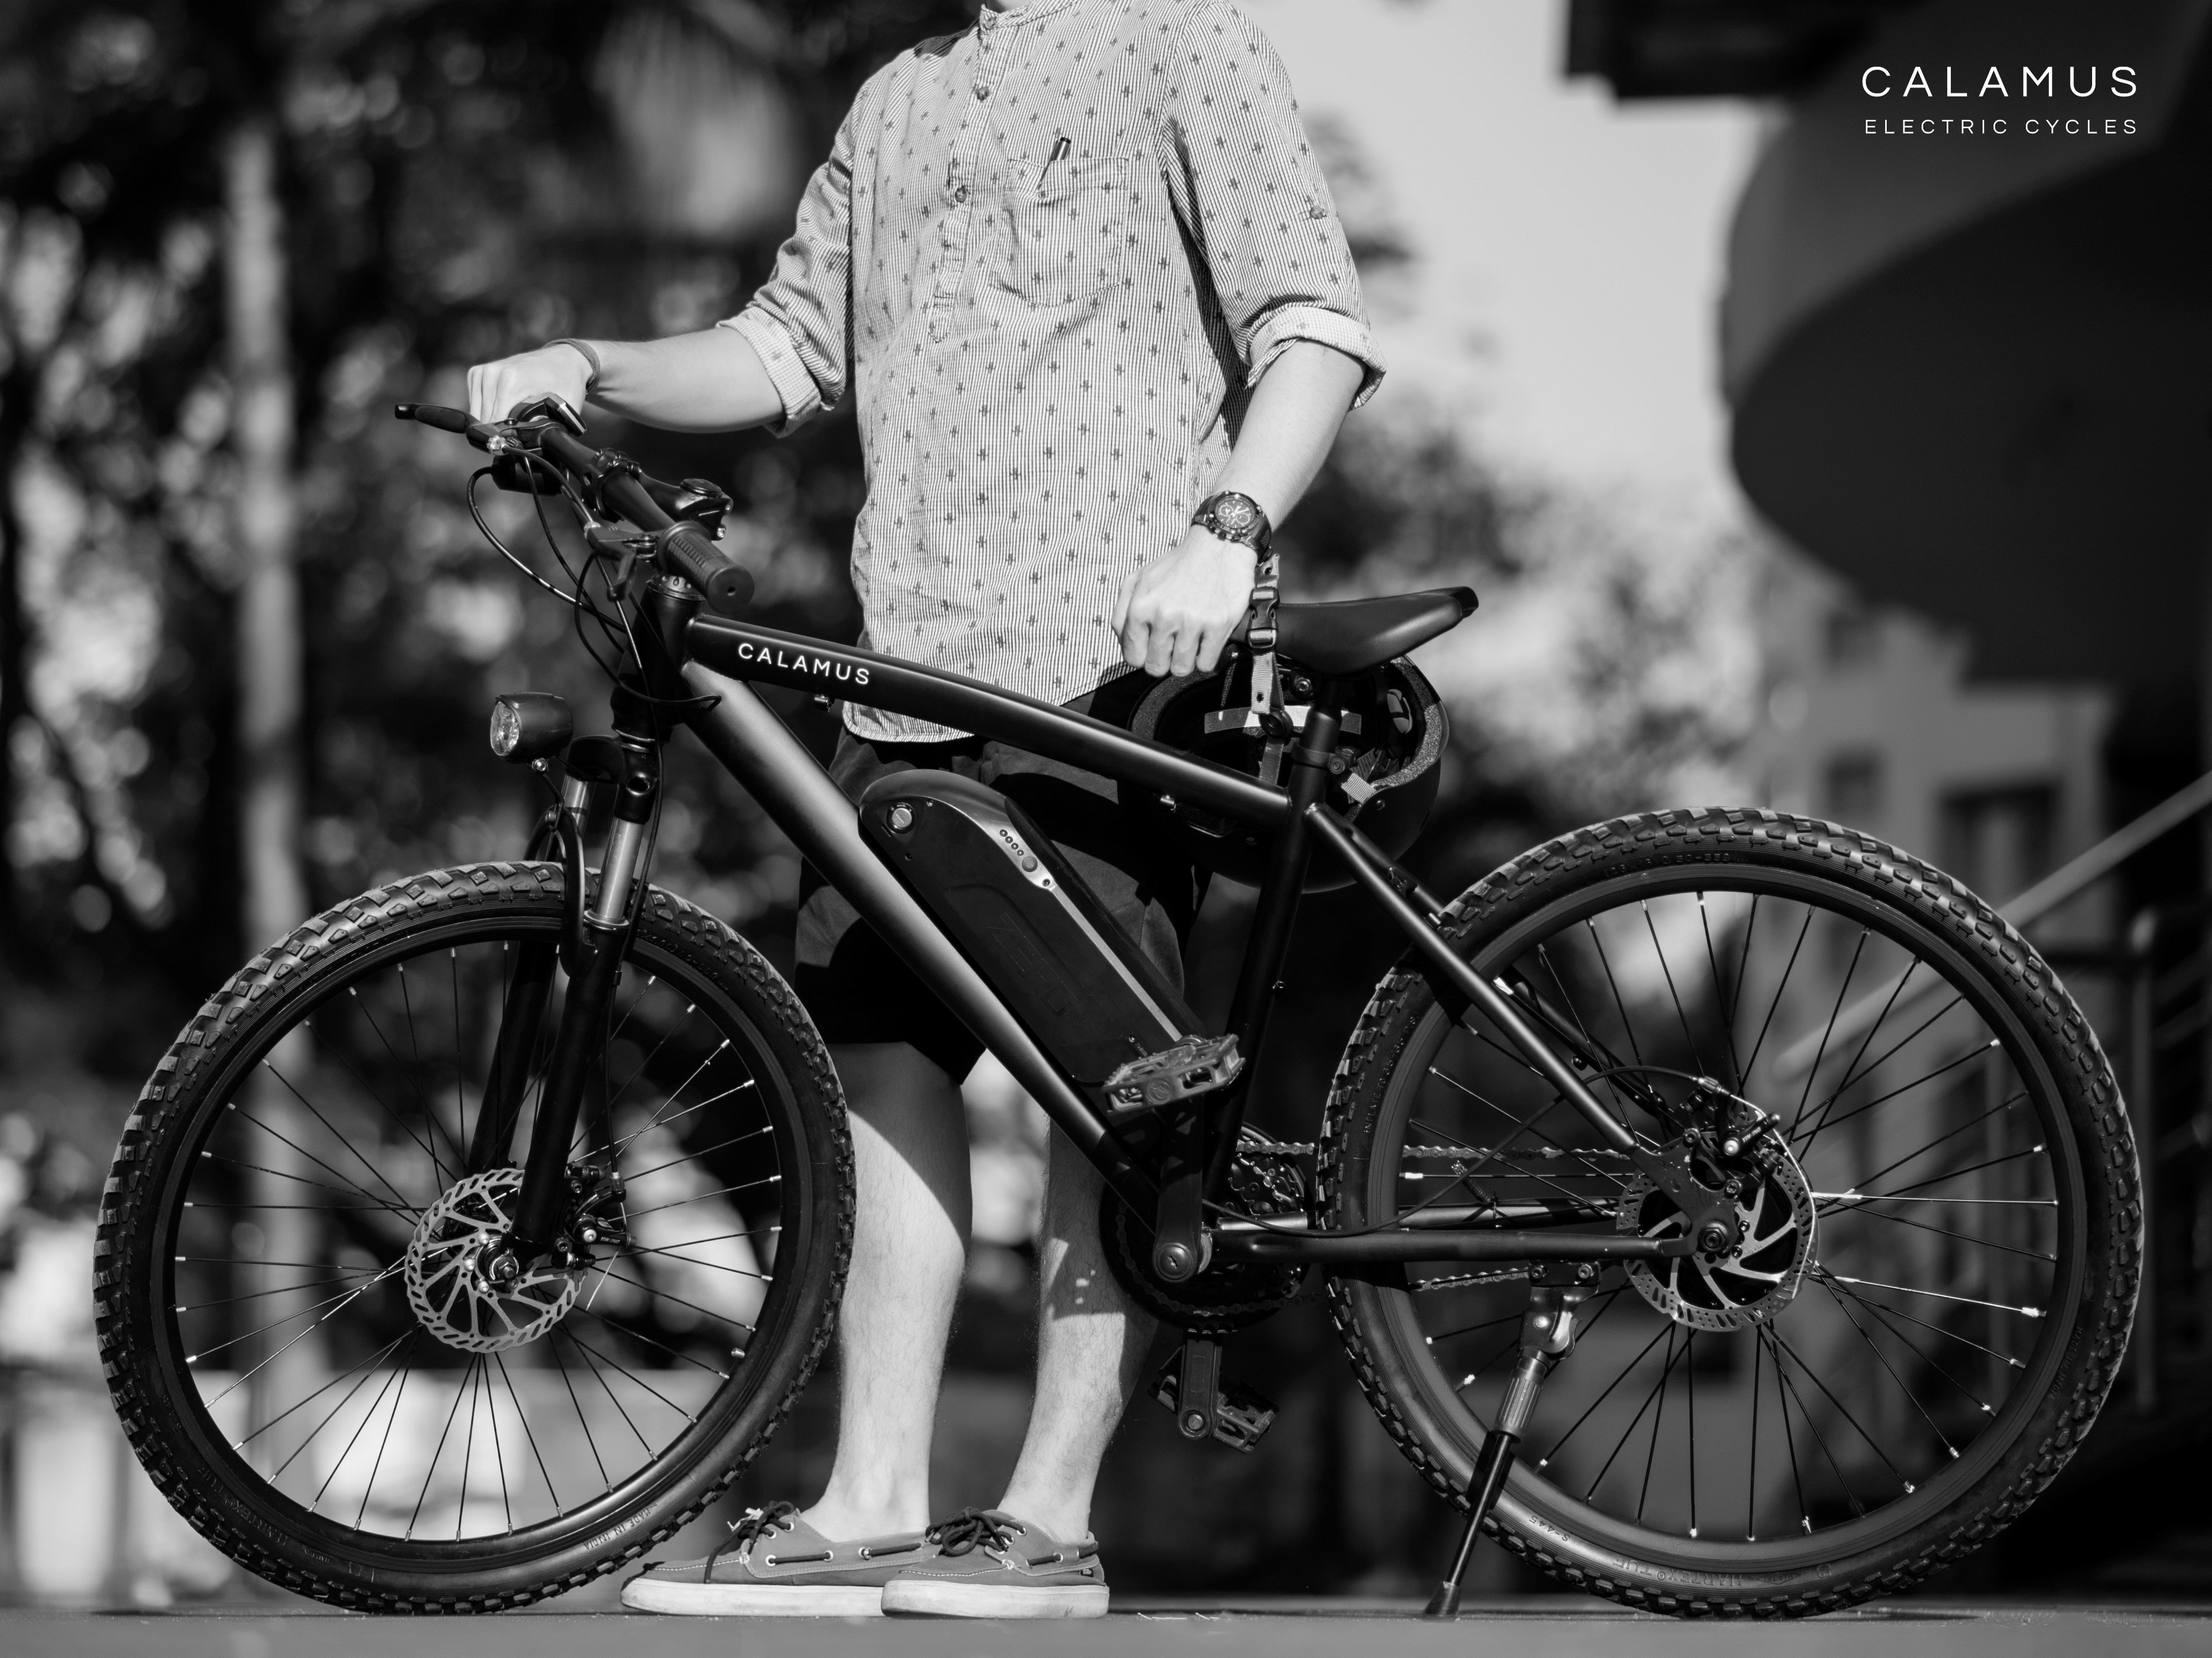 eBikes the future leader of Electric Vehicles in the next decade